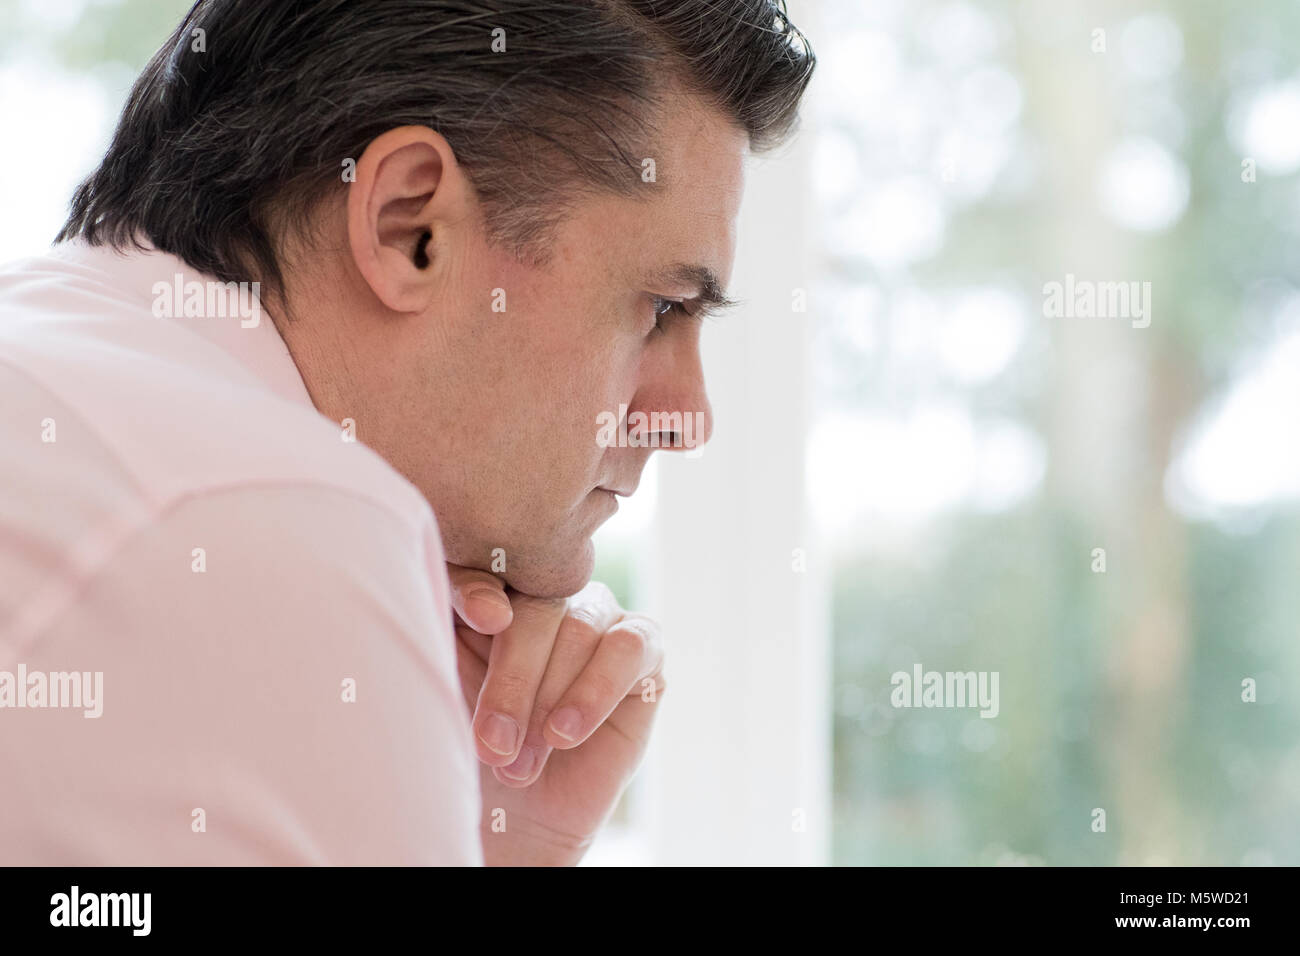 Profile View Of Worried Mature Man At Home Stock Photo